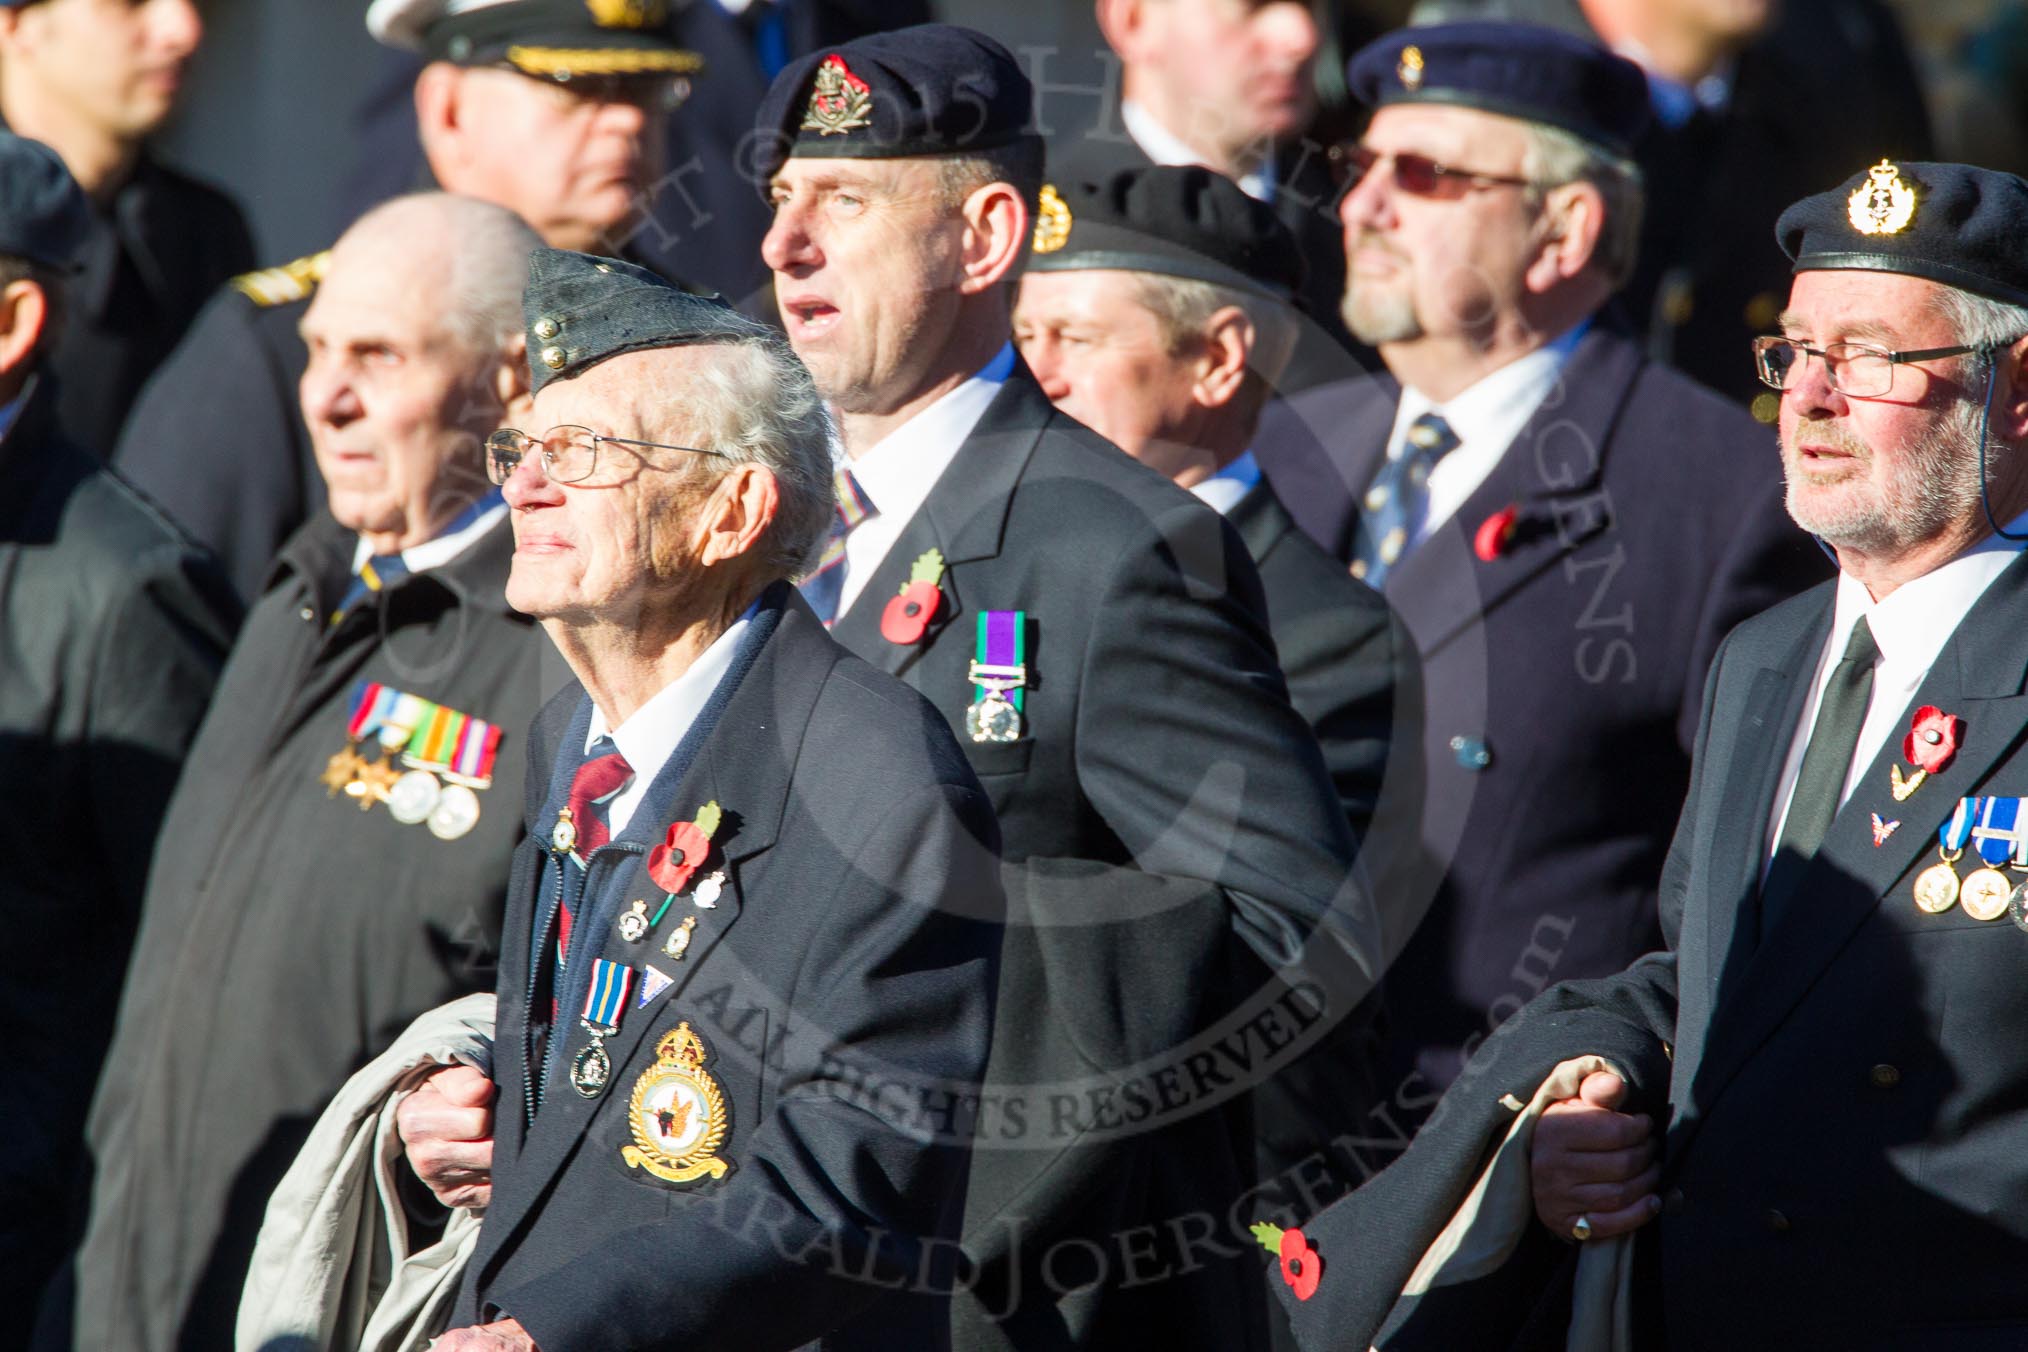 Remembrance Sunday Cenotaph March Past 2013: D13 - The Royal British Legion. There are more photos of this large group, please email Cenotaph@HaraldJoergens.com if interested..
Press stand opposite the Foreign Office building, Whitehall, London SW1,
London,
Greater London,
United Kingdom,
on 10 November 2013 at 11:40, image #109